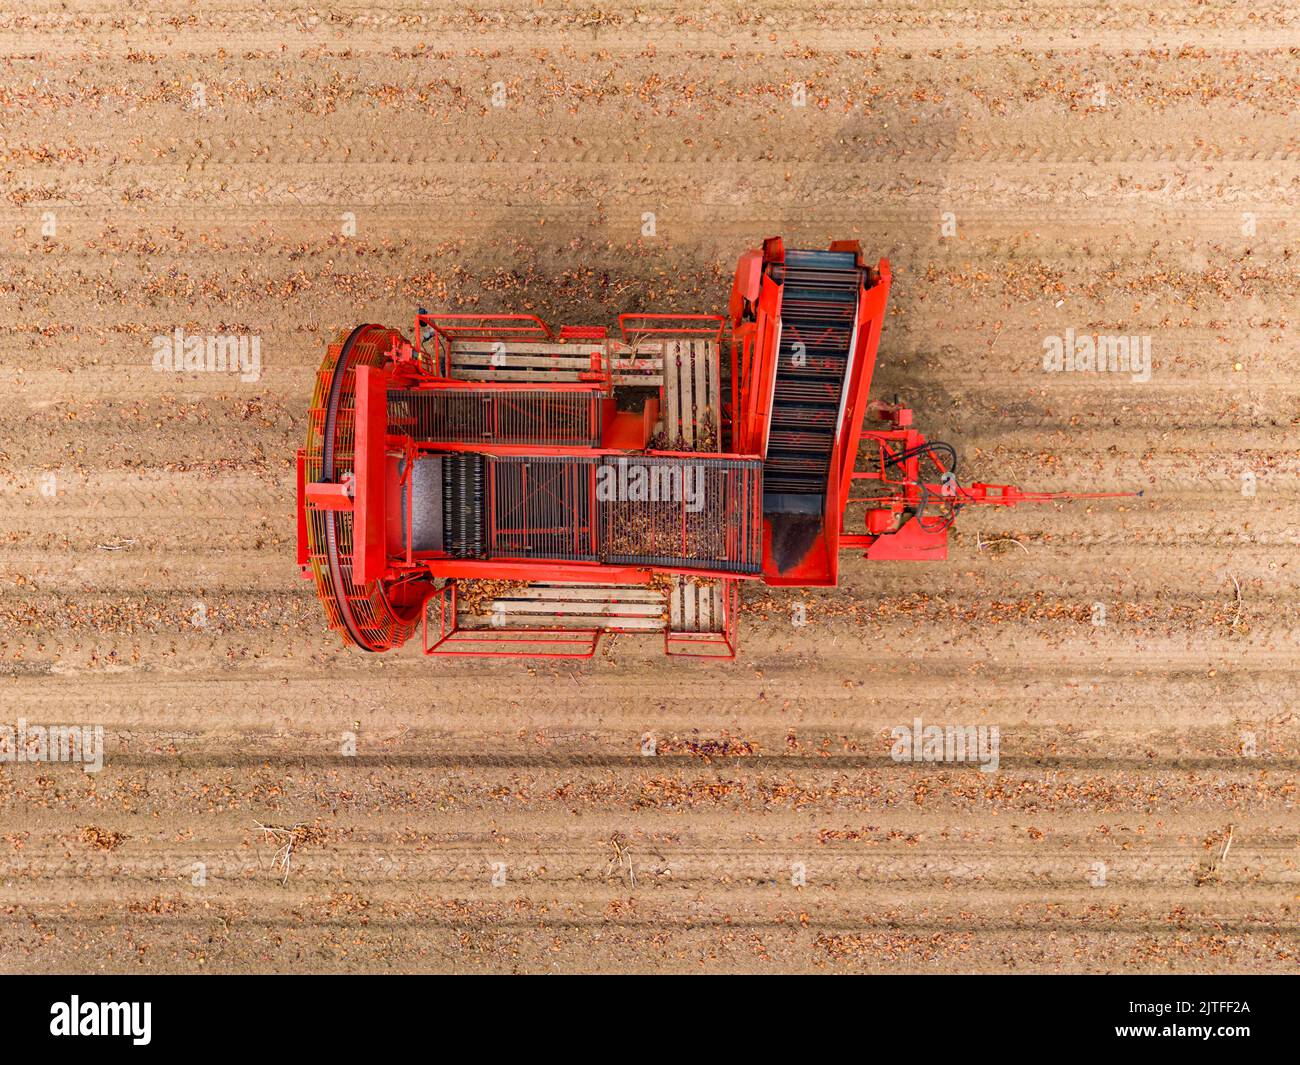 Red onion harvester machine after harvesting in an dry onion field, Germany Stock Photo